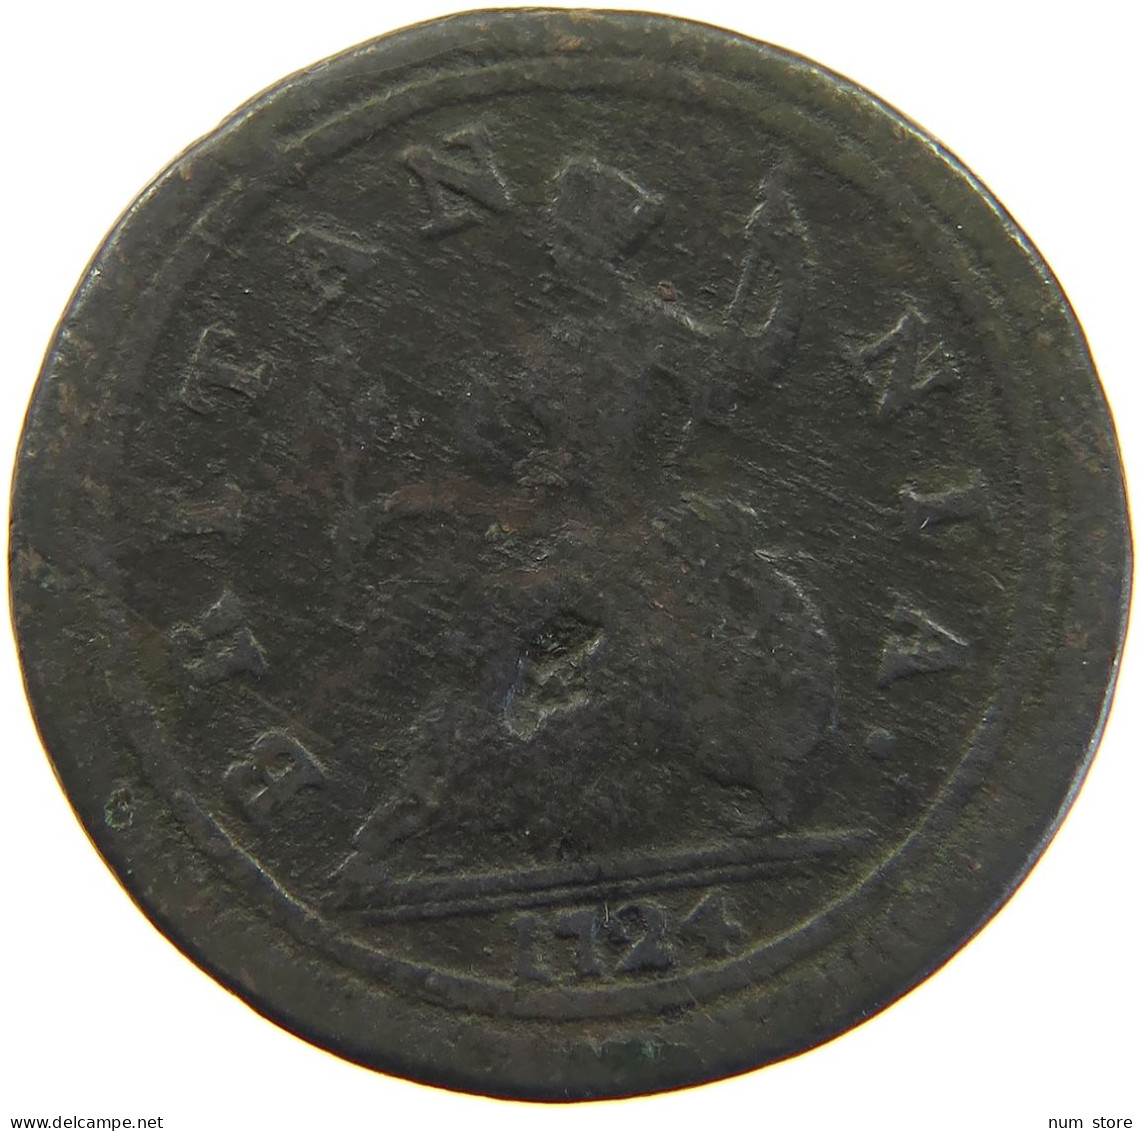 GREAT BRITAIN HALFPENNY 1724 George I. (1714-1727) #t155 0197 - B. 1/2 Penny